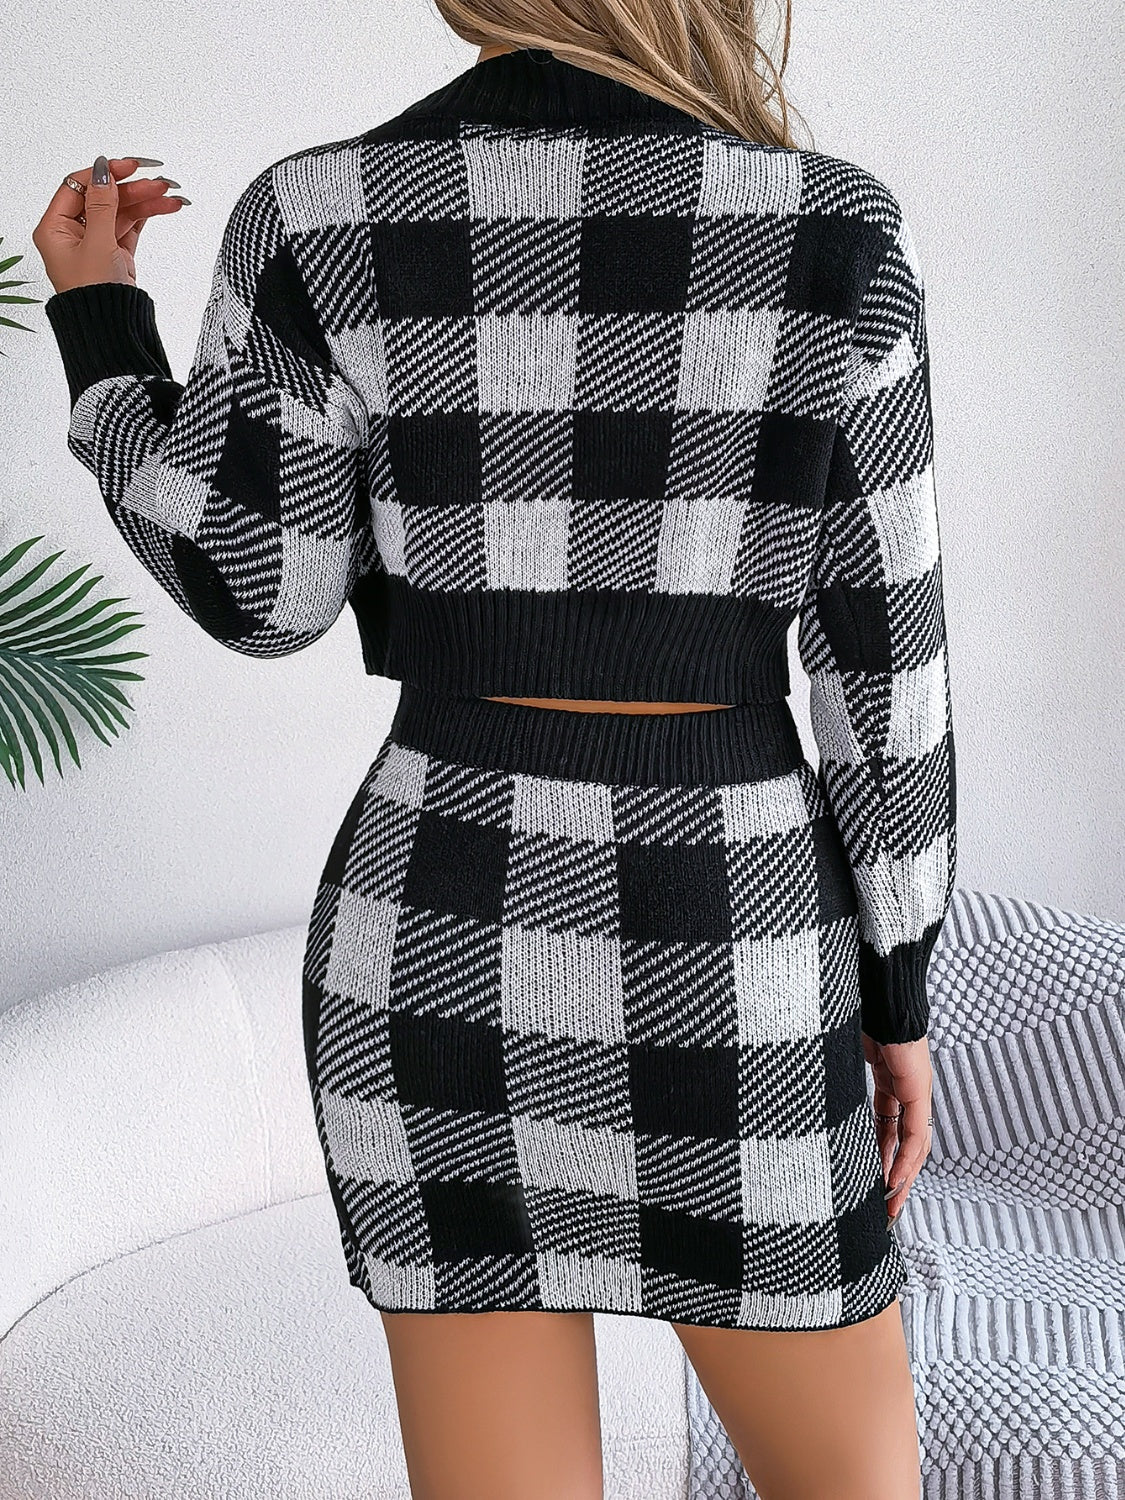 Plaid Round Neck Top and Skirt Sweater Set - Thandynie